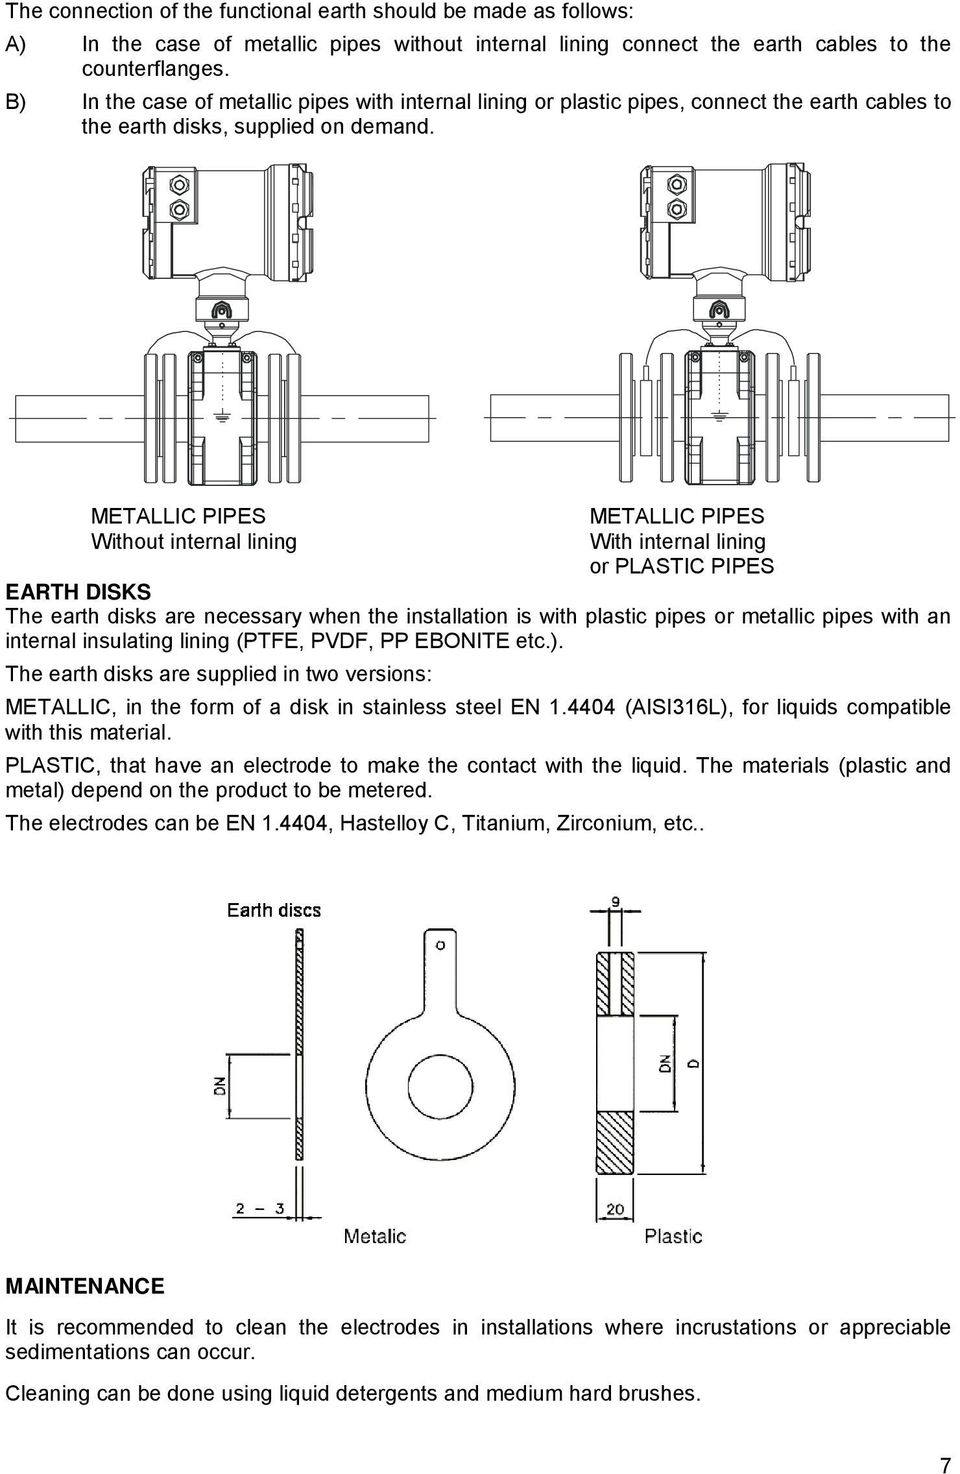 METALLIC PIPES METALLIC PIPES Without internal lining With internal lining or PLASTIC PIPES EARTH DISKS The earth disks are necessary when the installation is with plastic pipes or metallic pipes